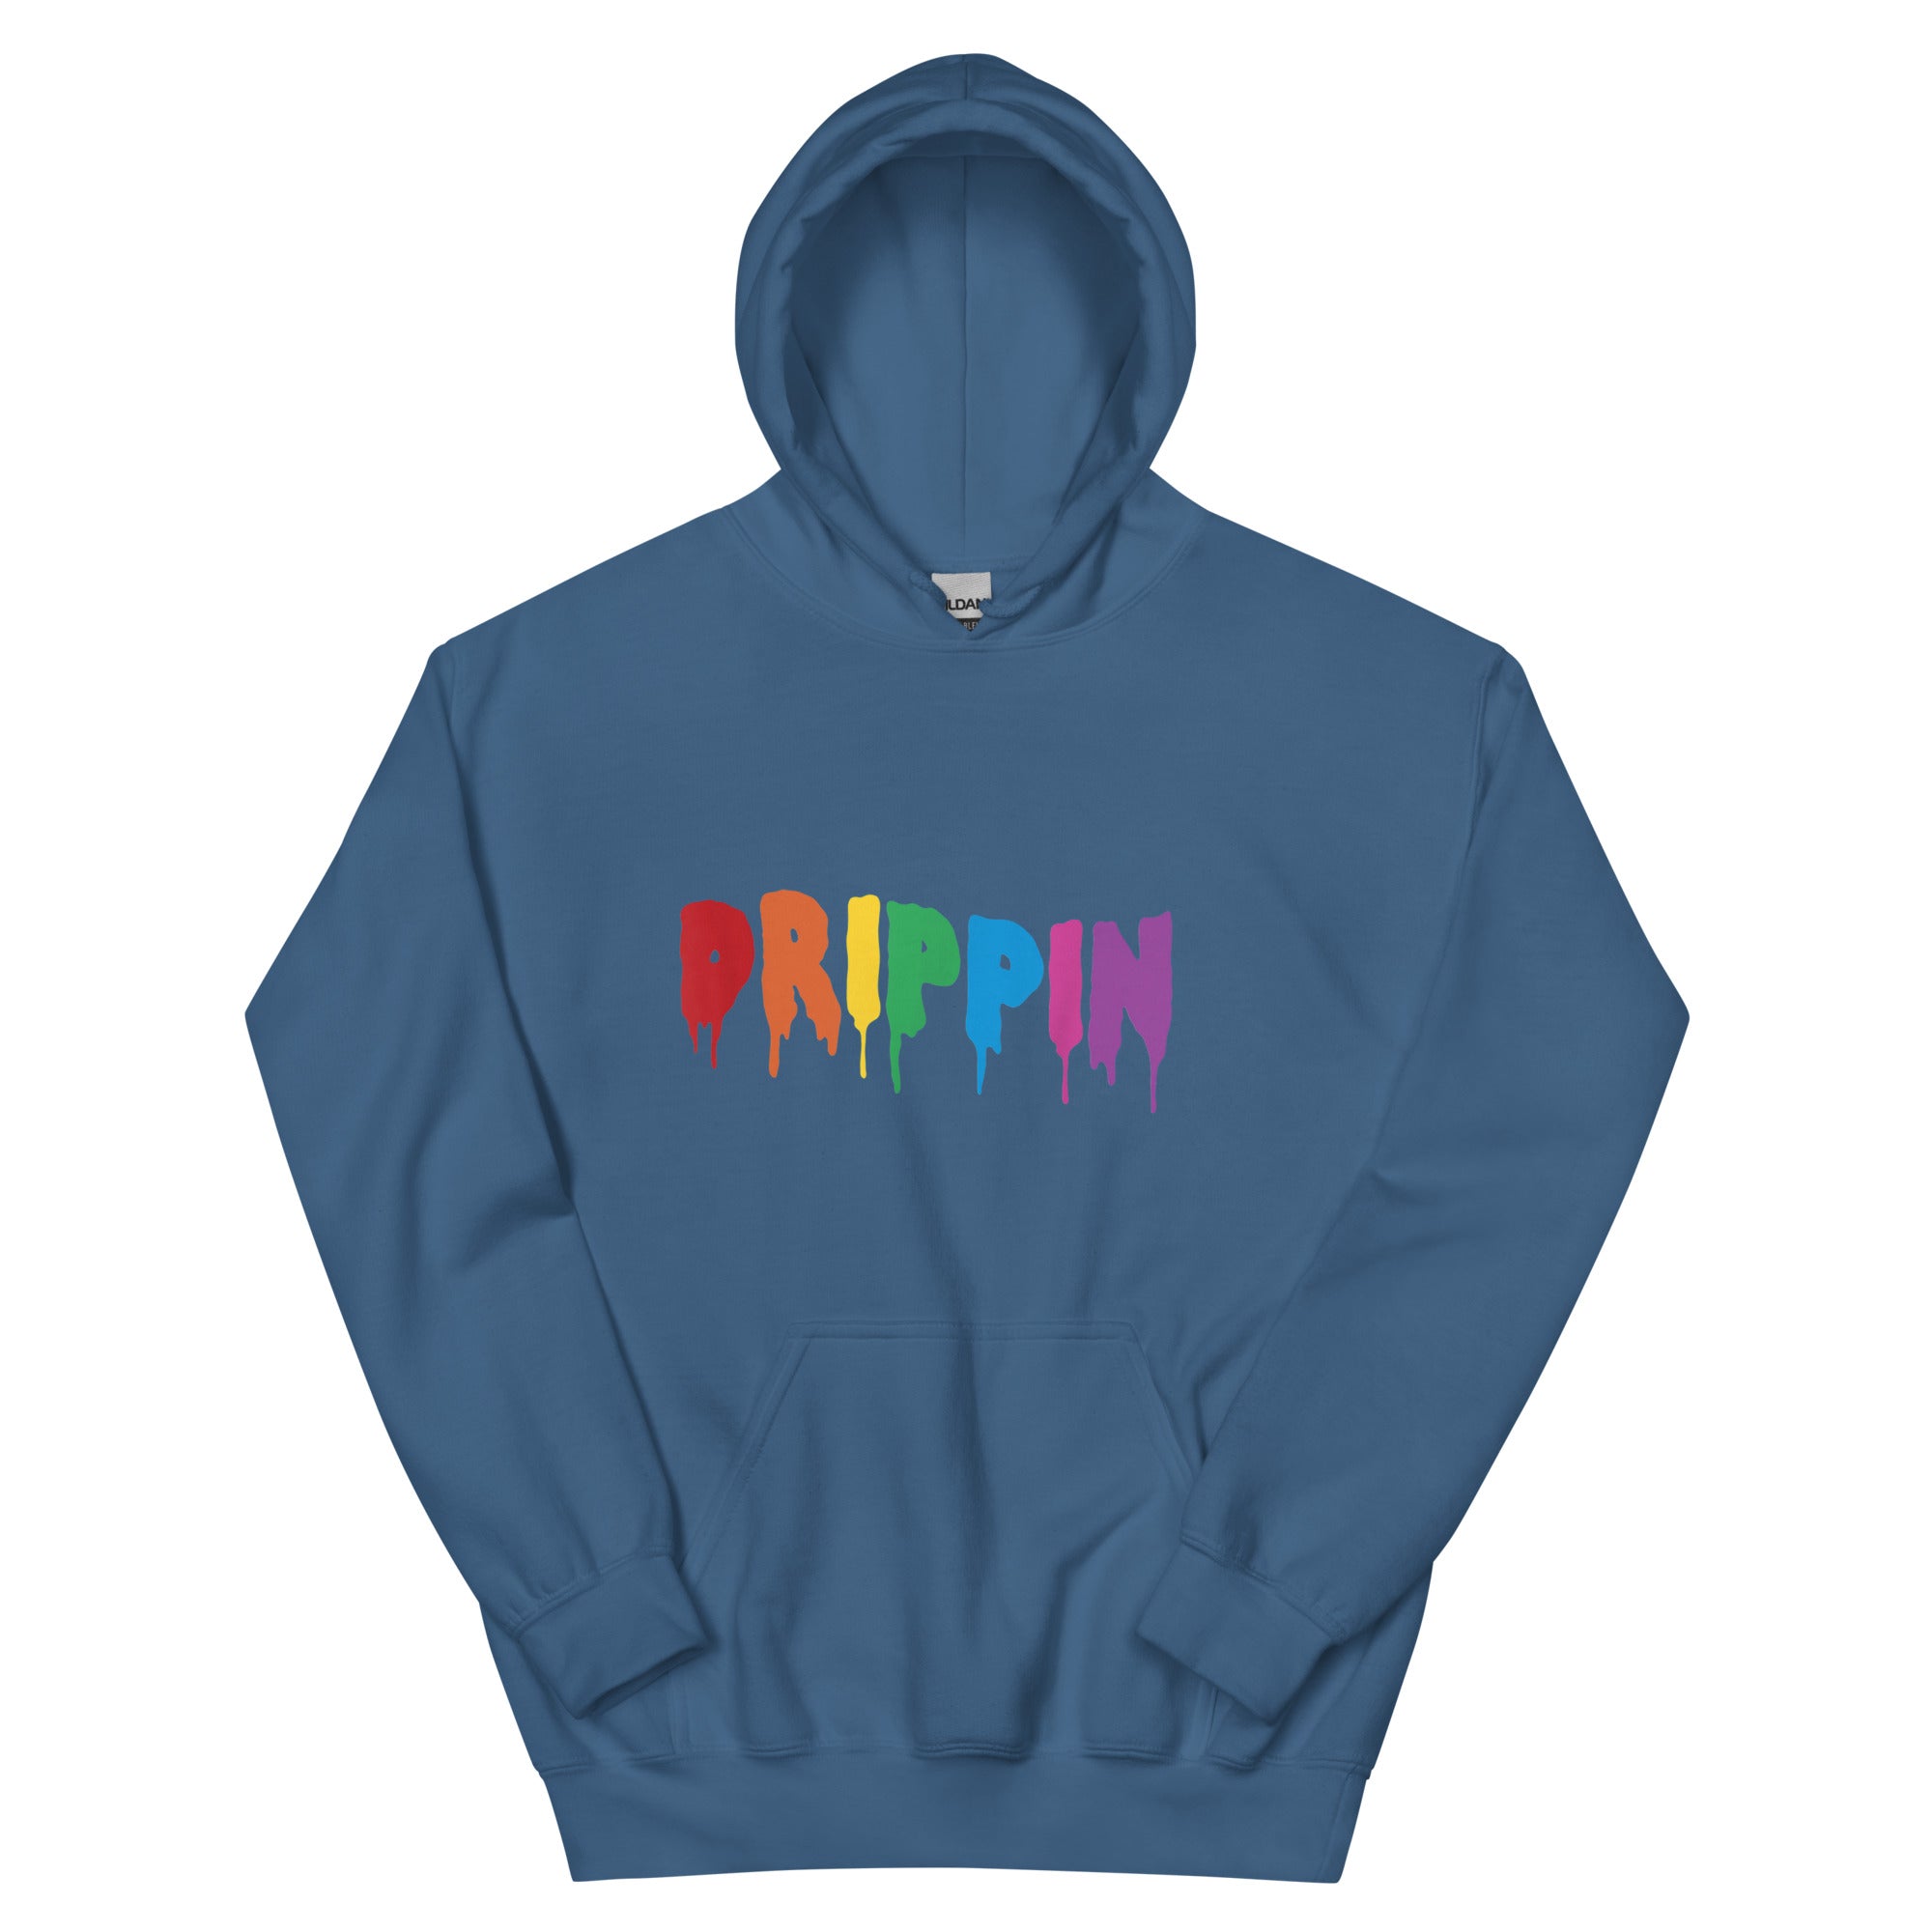 DRIPPIN COLORFUL HIP HOP Unisex Hoodie